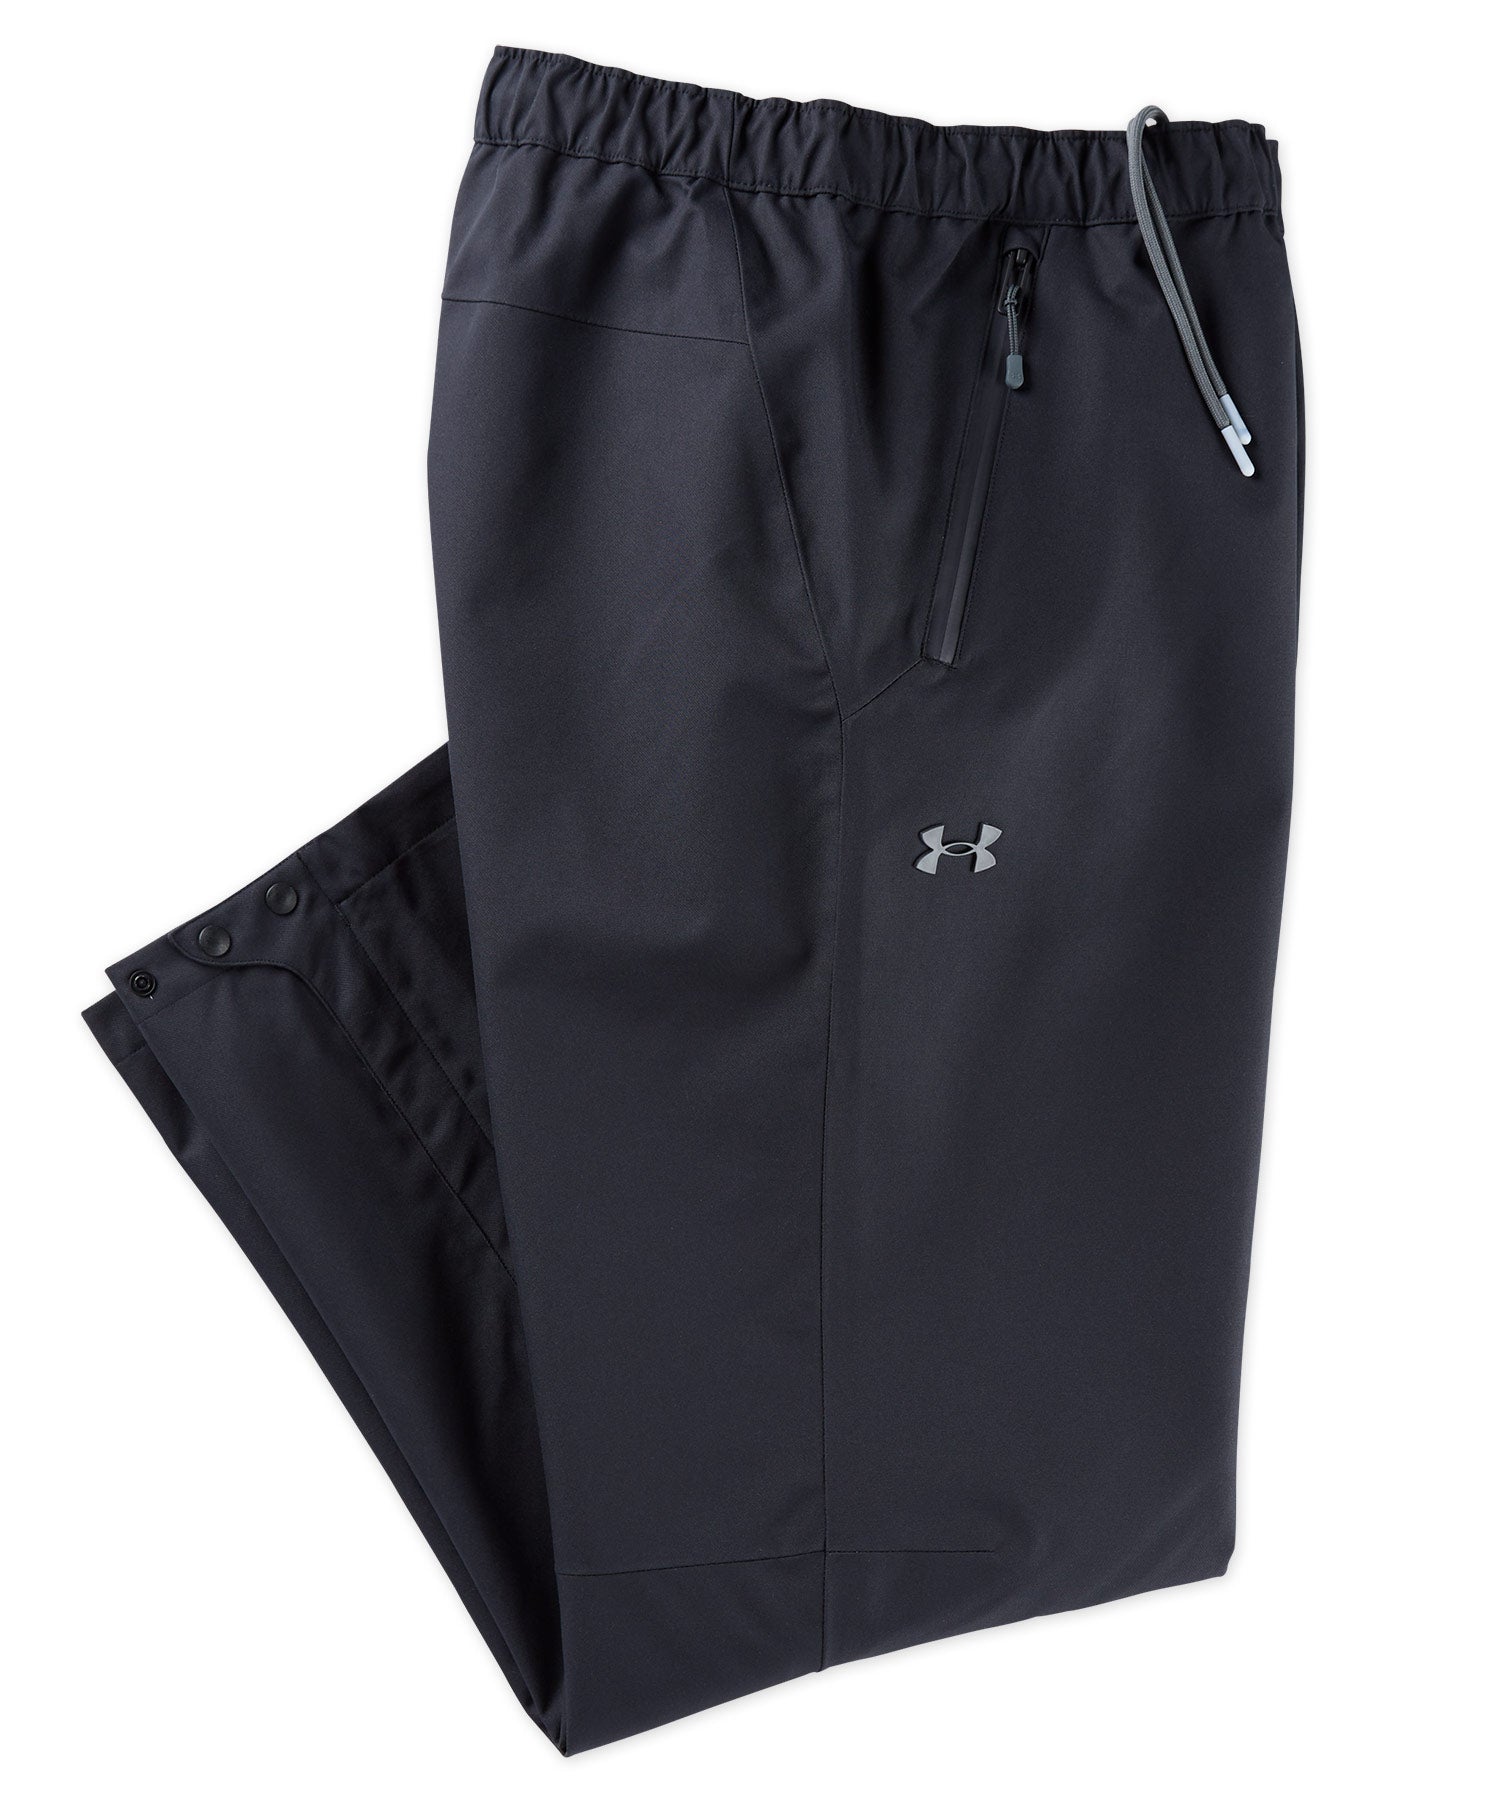 Under Armour Pants Women's Size Small Cold Gear Water Resistant